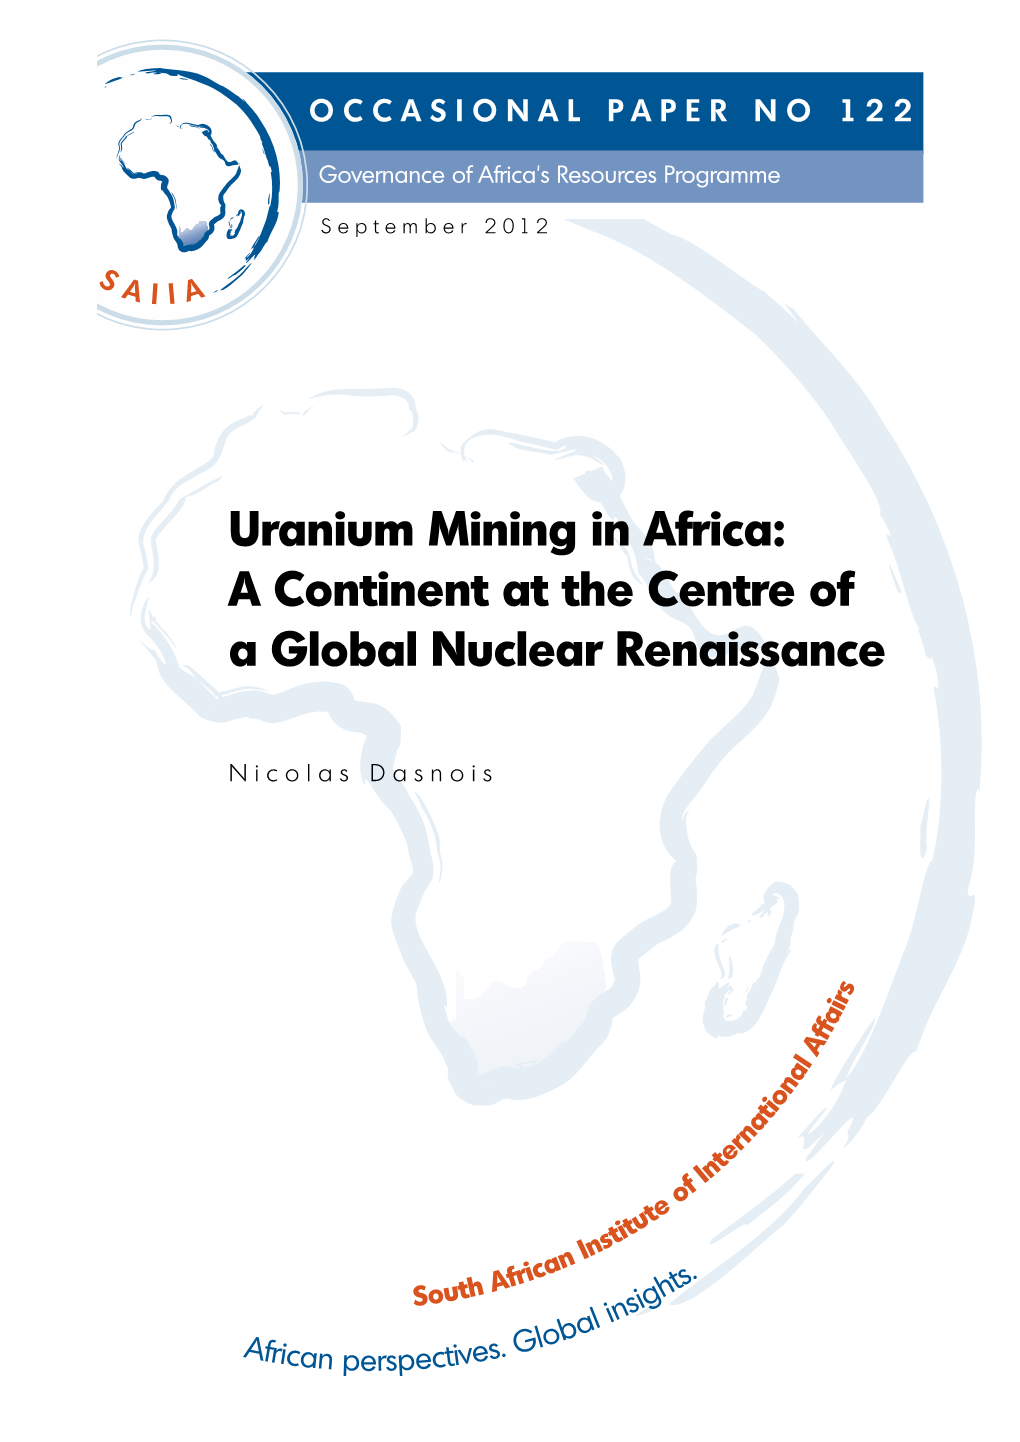 Uranium Mining in Africa: a Continent at the Centre of a Global Nuclear Renaissance